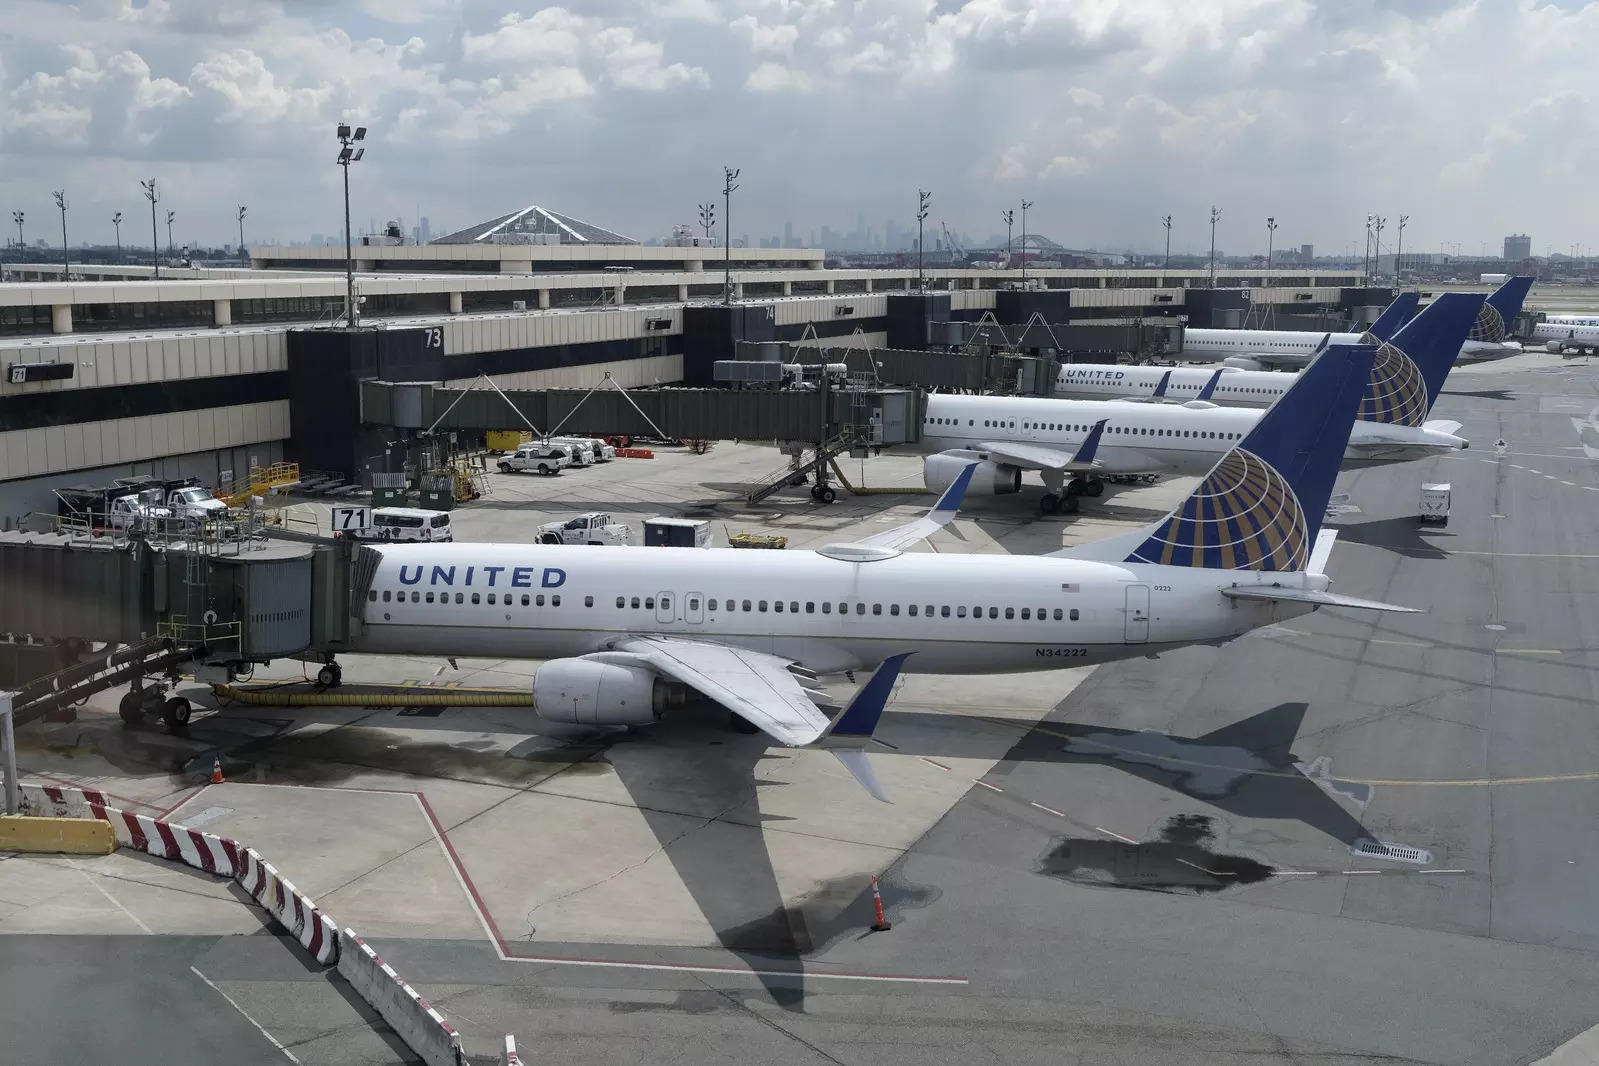 Flight trouble: Strained US airlines face July 4 test